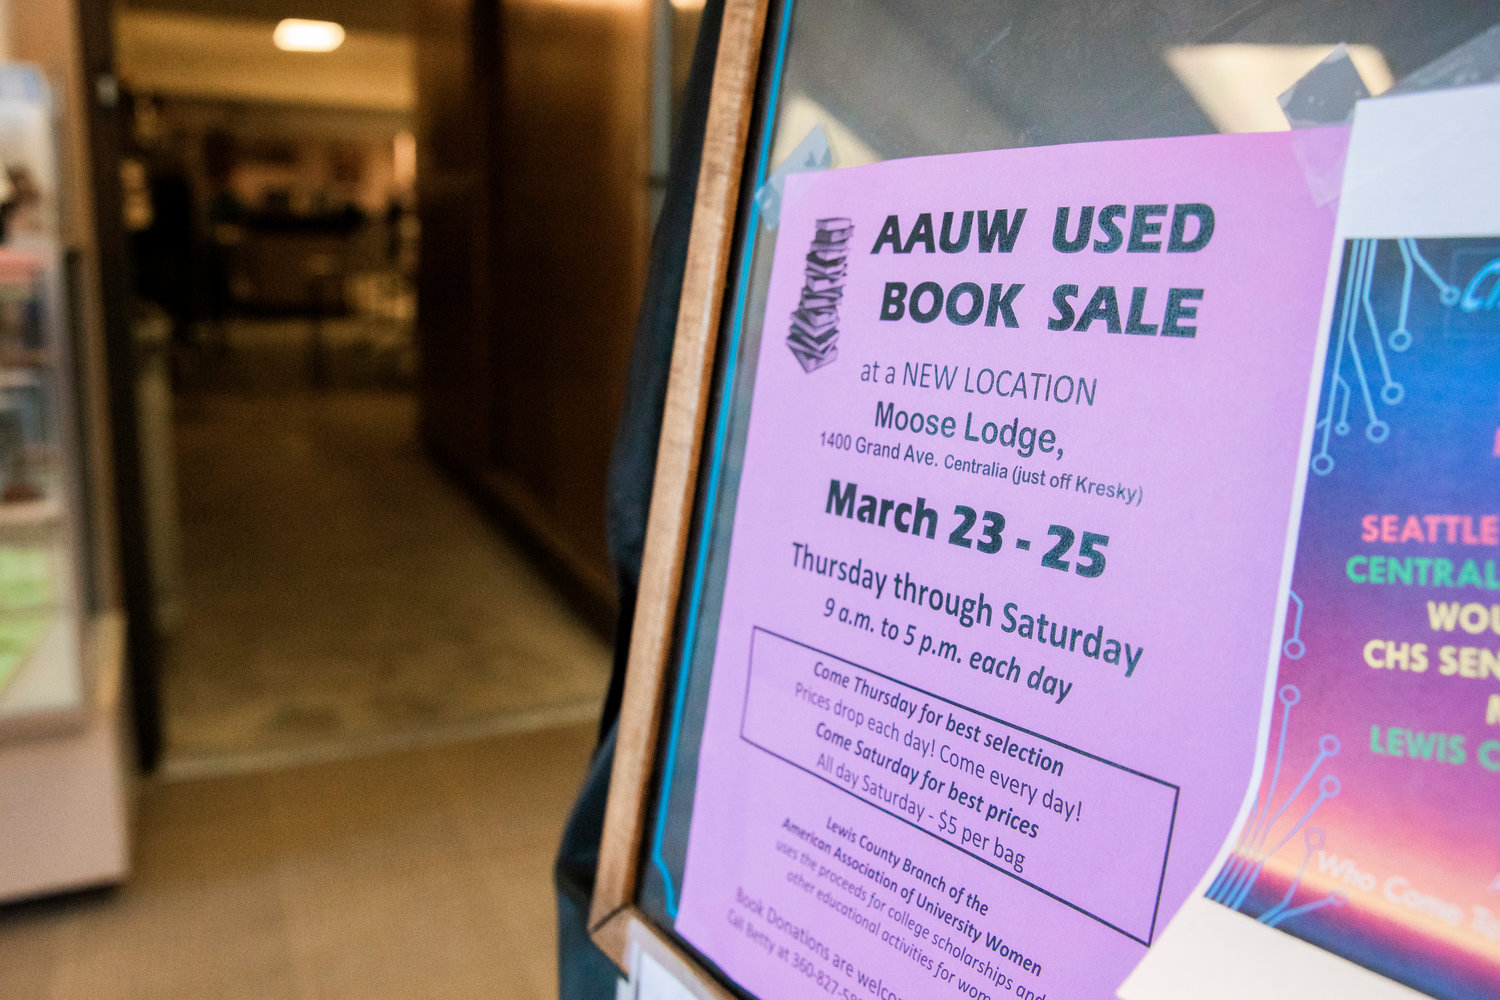 The AAUW Used Book Sale, which began over 40 years ago, is being held at the Moose Lodge in Centralia for the first time.